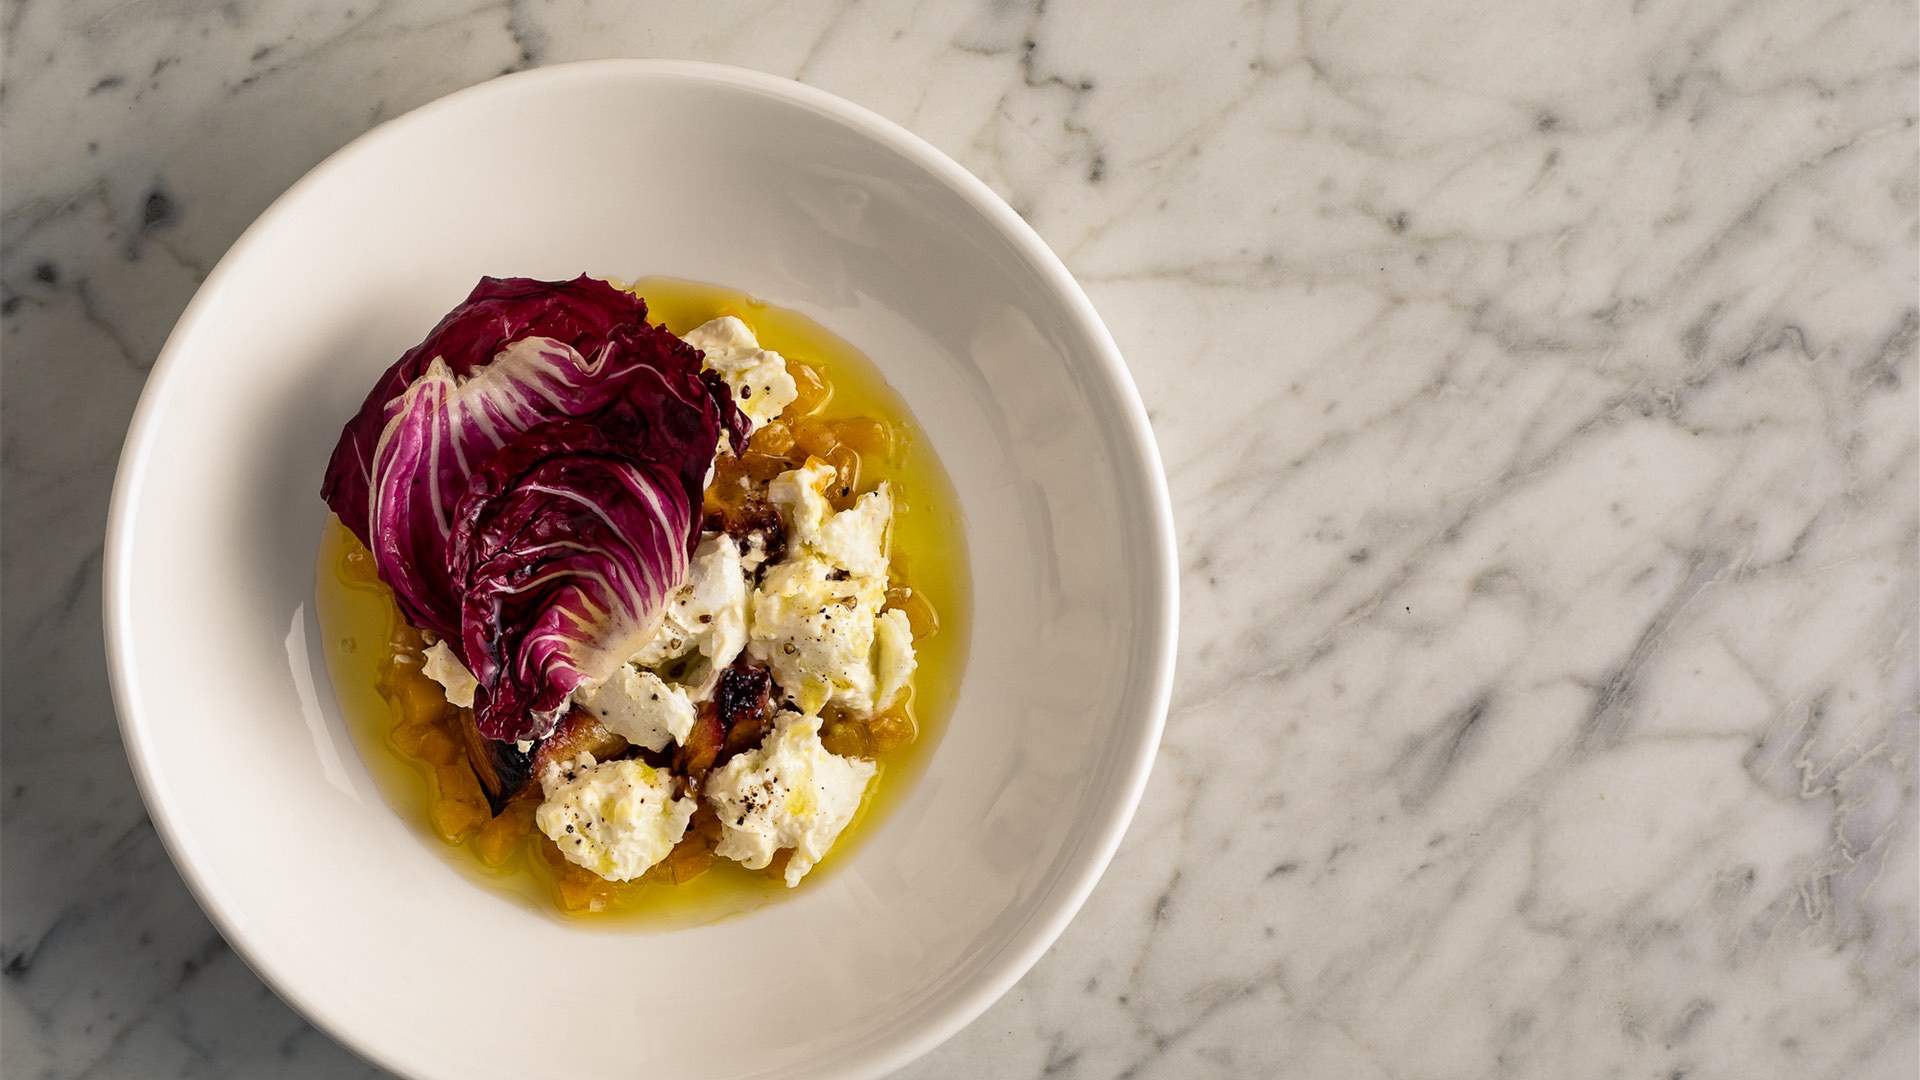 Arthur Is Surry Hills' New Set Menu-Only Restaurant Inspired by Grandpa